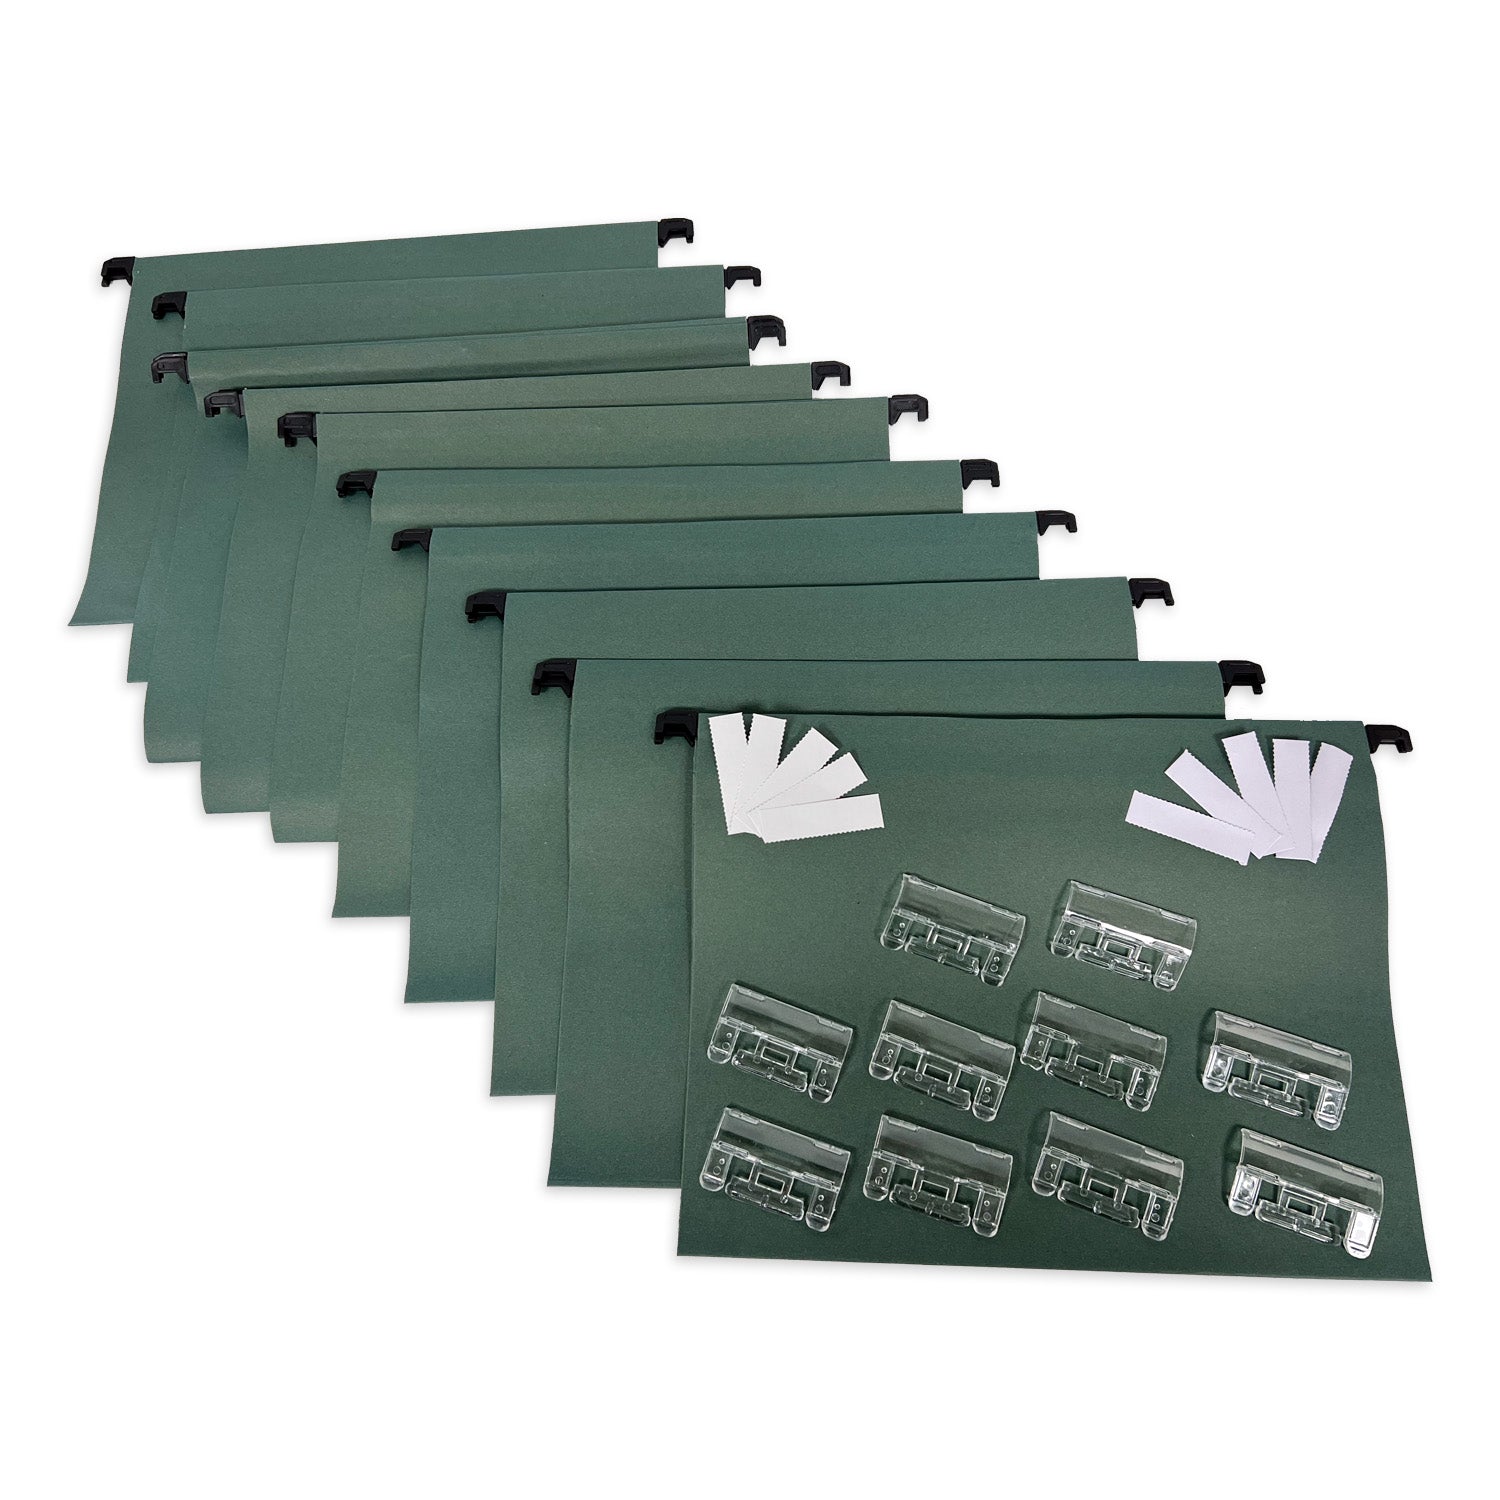 Array of 10 A4 green manilla suspension files fanned out with white paper inserts on top, accompanied by clear plastic tabs, ready for organization in a filing cabinet.